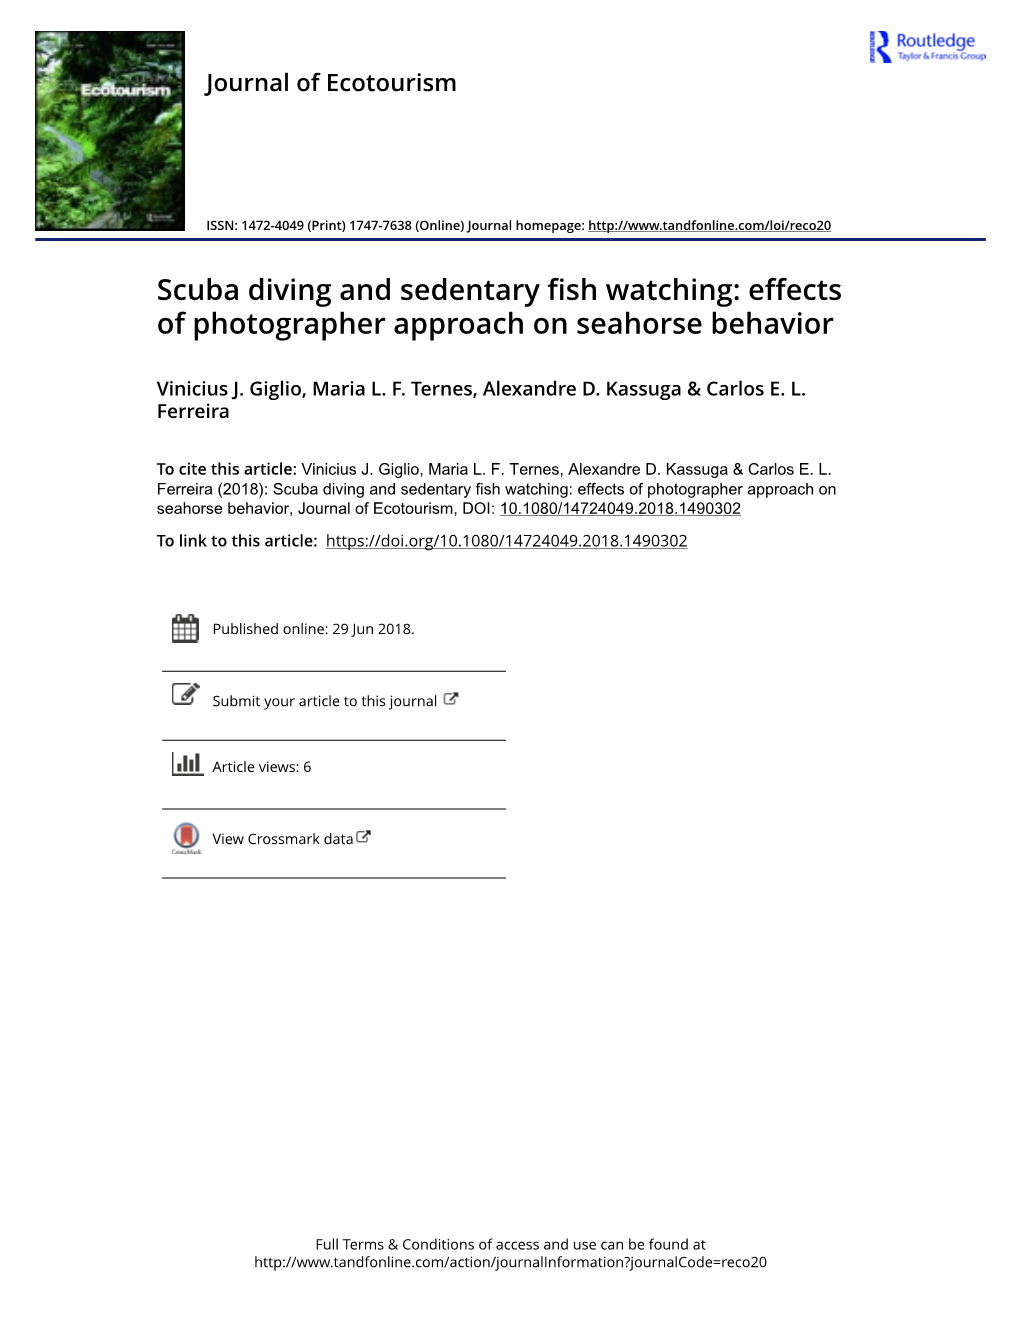 Scuba Diving and Sedentary Fish Watching: Effects of Photographer Approach on Seahorse Behavior